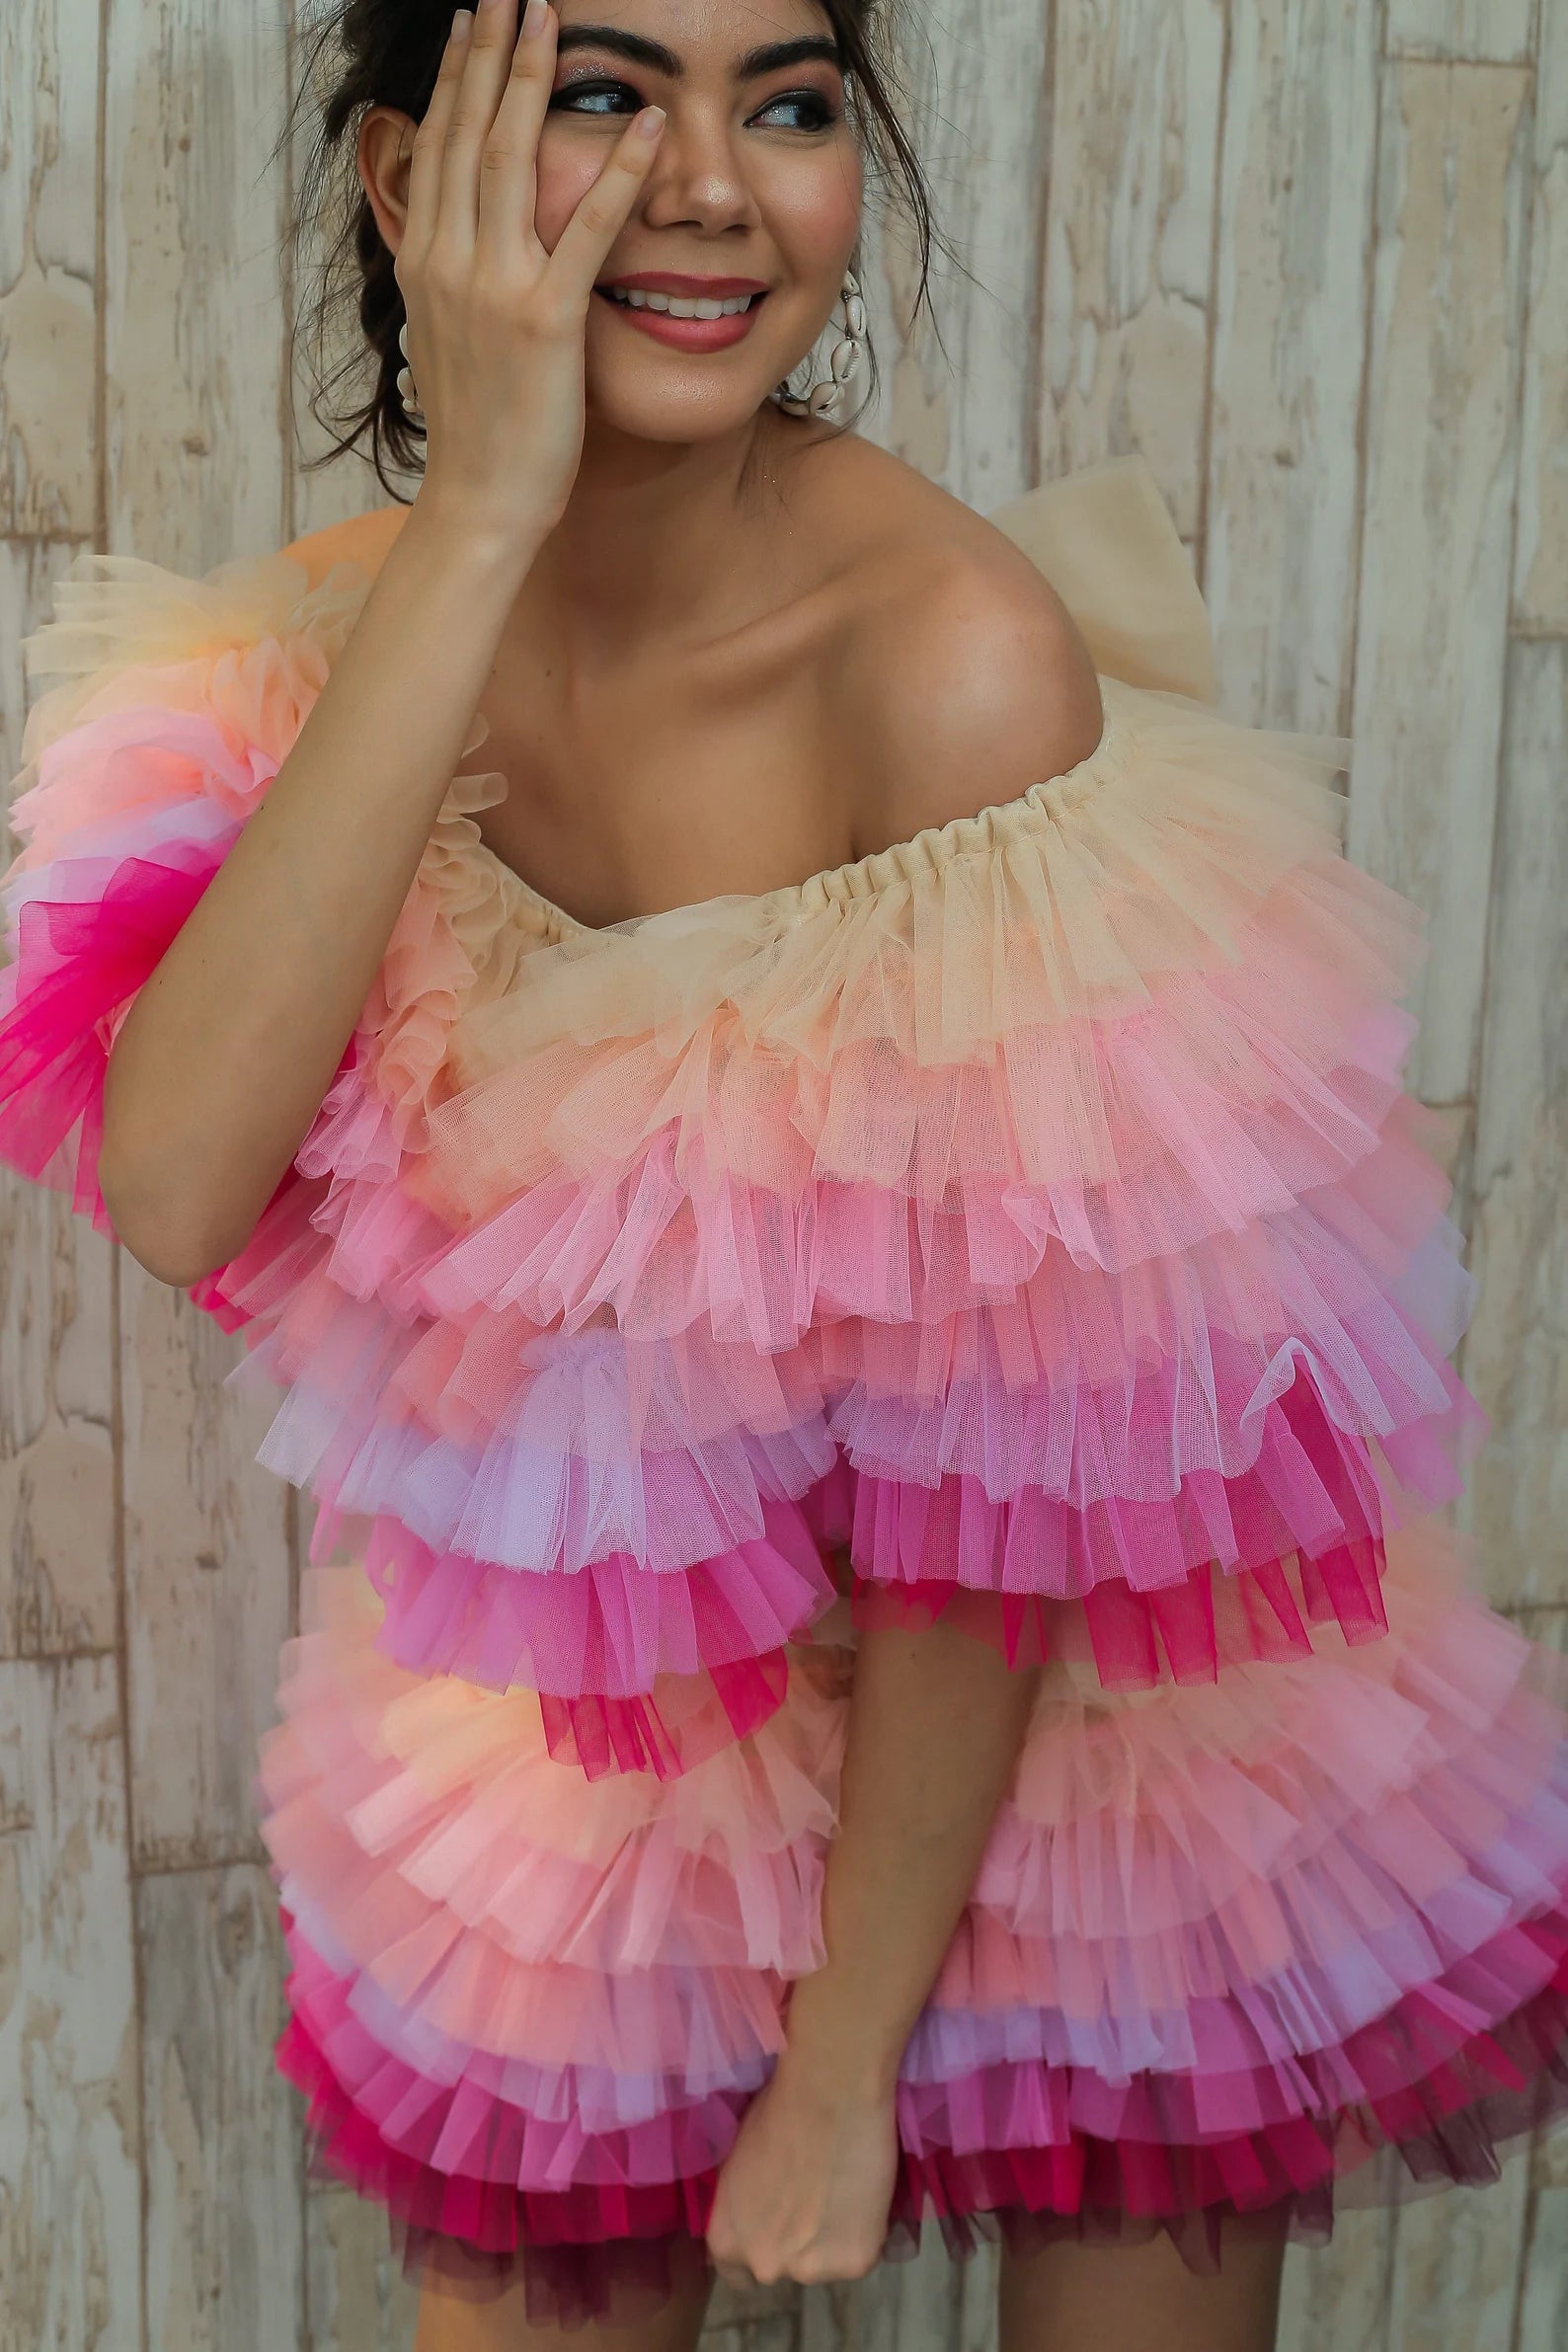 Candy Floss Dreams Tulle Cloud Dress